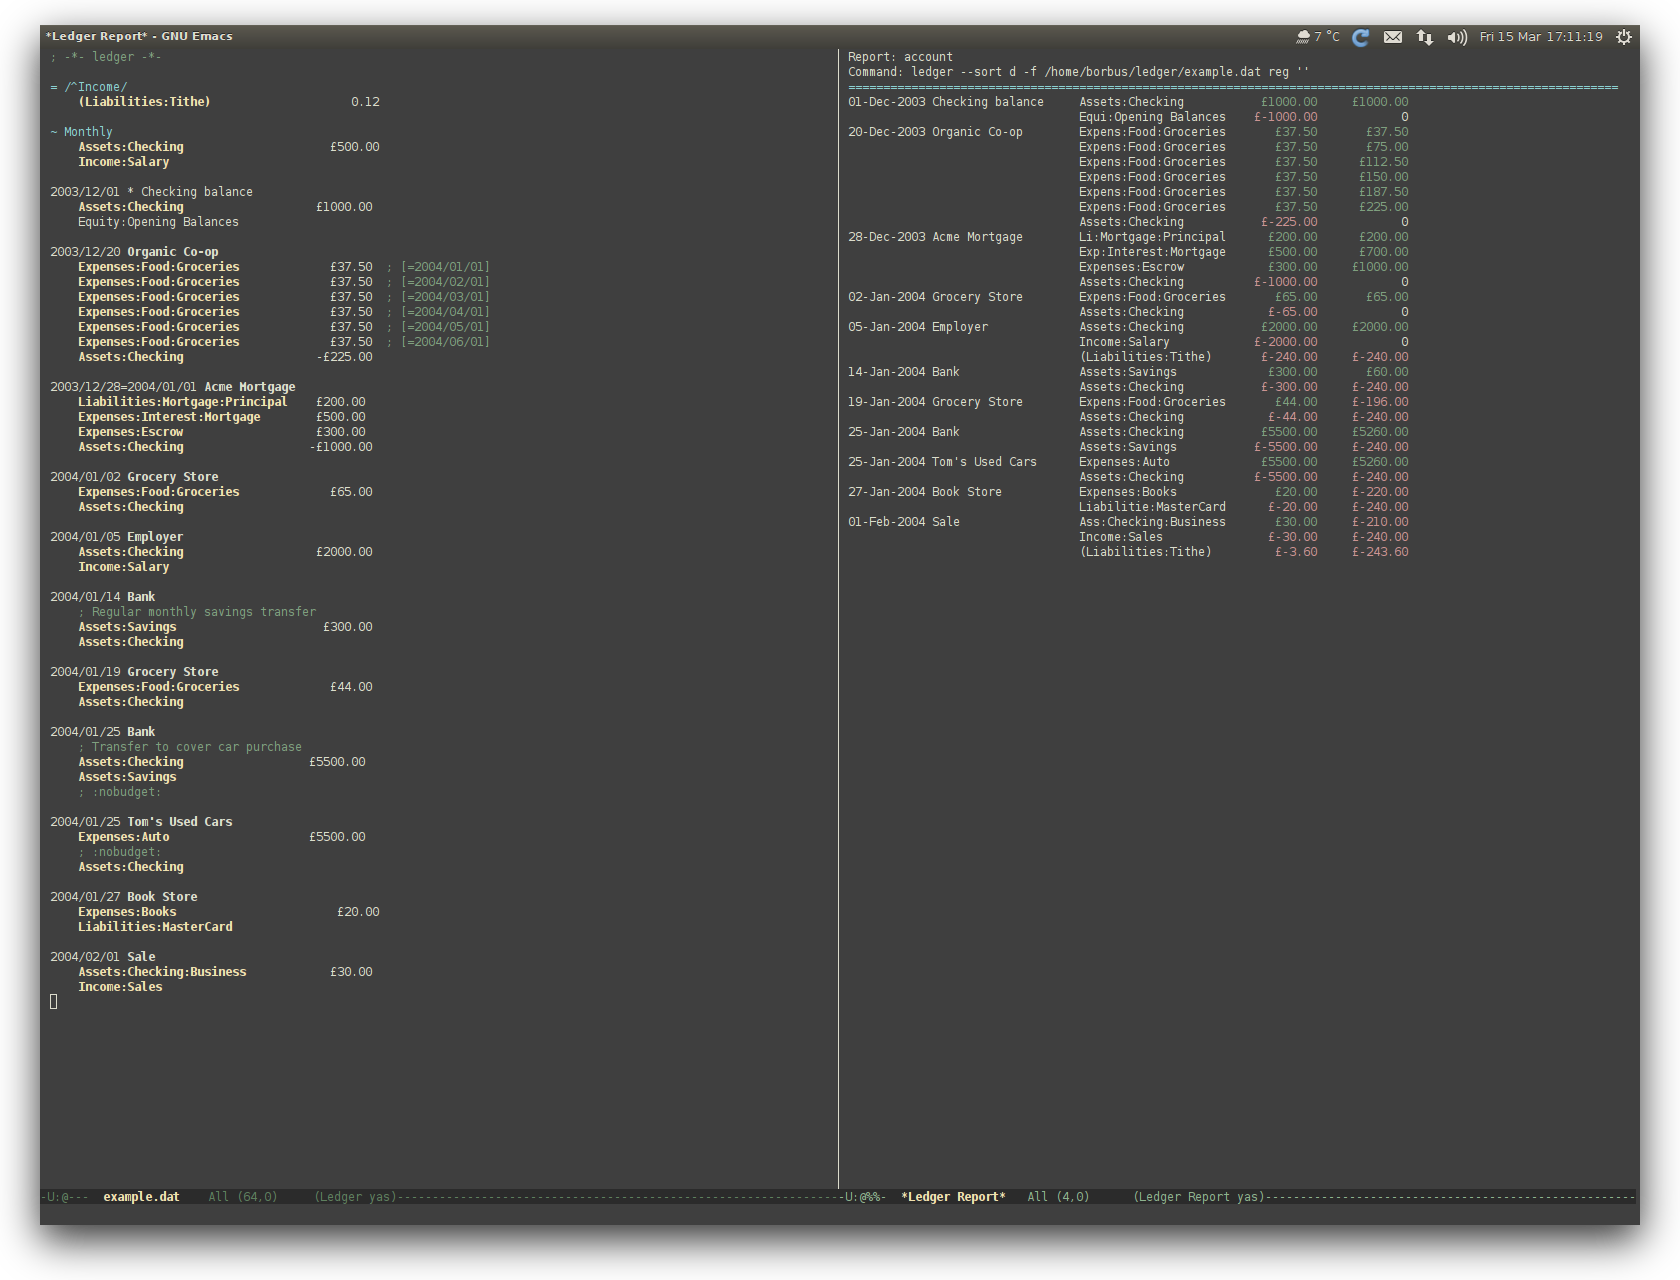 /TakeV/spacemacs/media/commit/a3635045c388daf0f5c3c85f3d01656c0931bb30/layers/finance/img/ledger.png